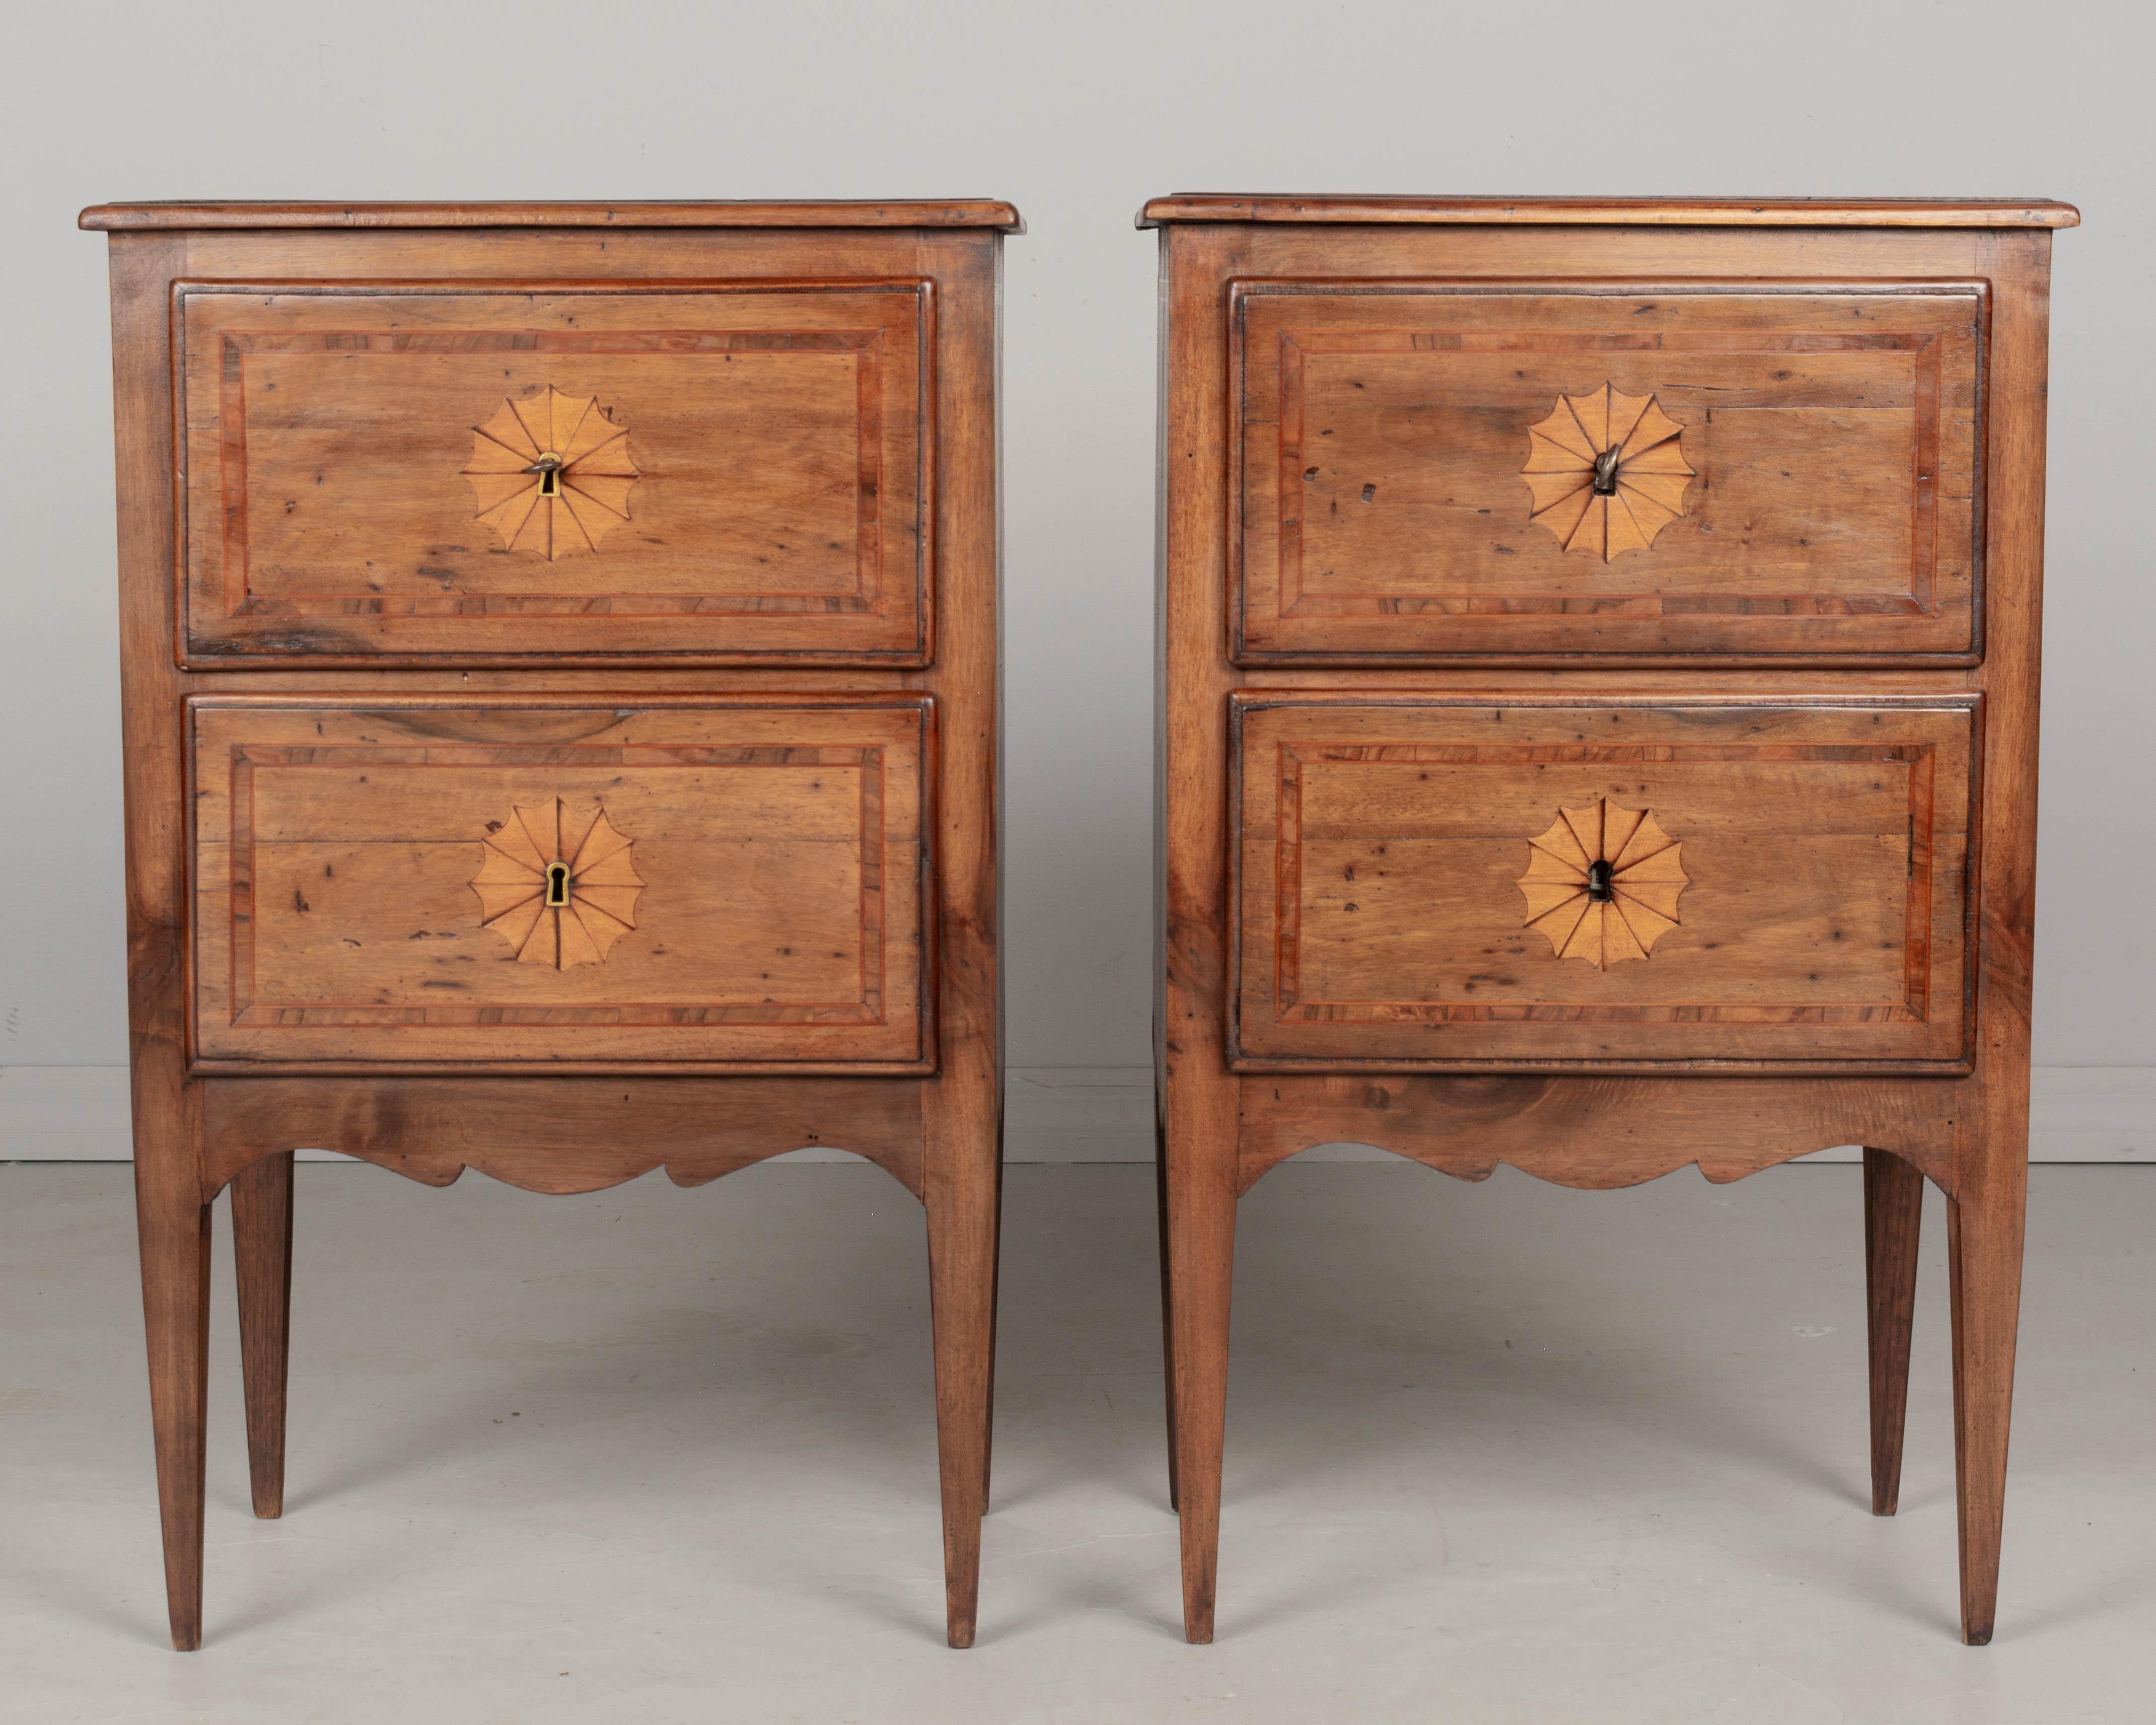 A pair of early 20th century Italian marquetry commodito, or nightstands, with inlaid veneer of walnut. Two dovetailed drawers, each with working lock and key. Two escutcheons are missing. Circa 1900-1920.  Sign of old wood worms but not